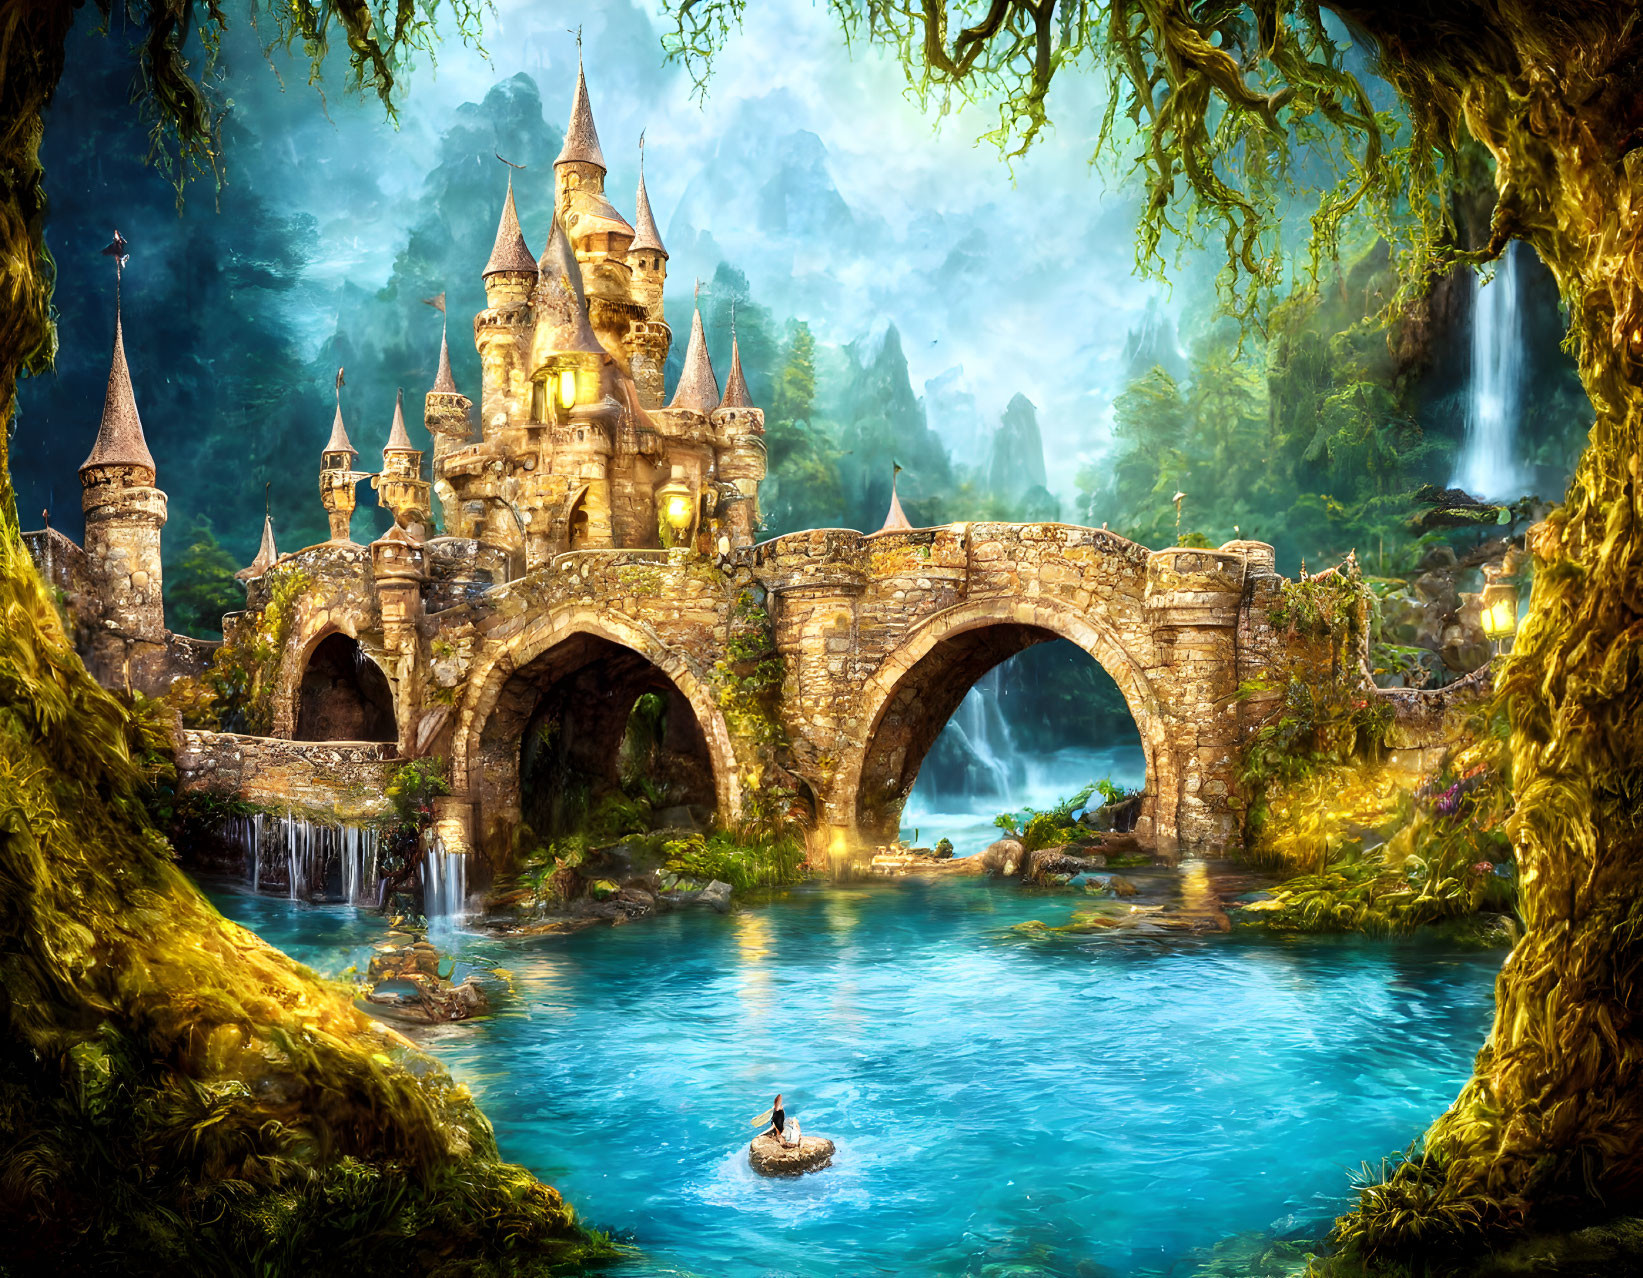 Majestic castle with spires near stone bridge over blue river surrounded by lush greenery and water